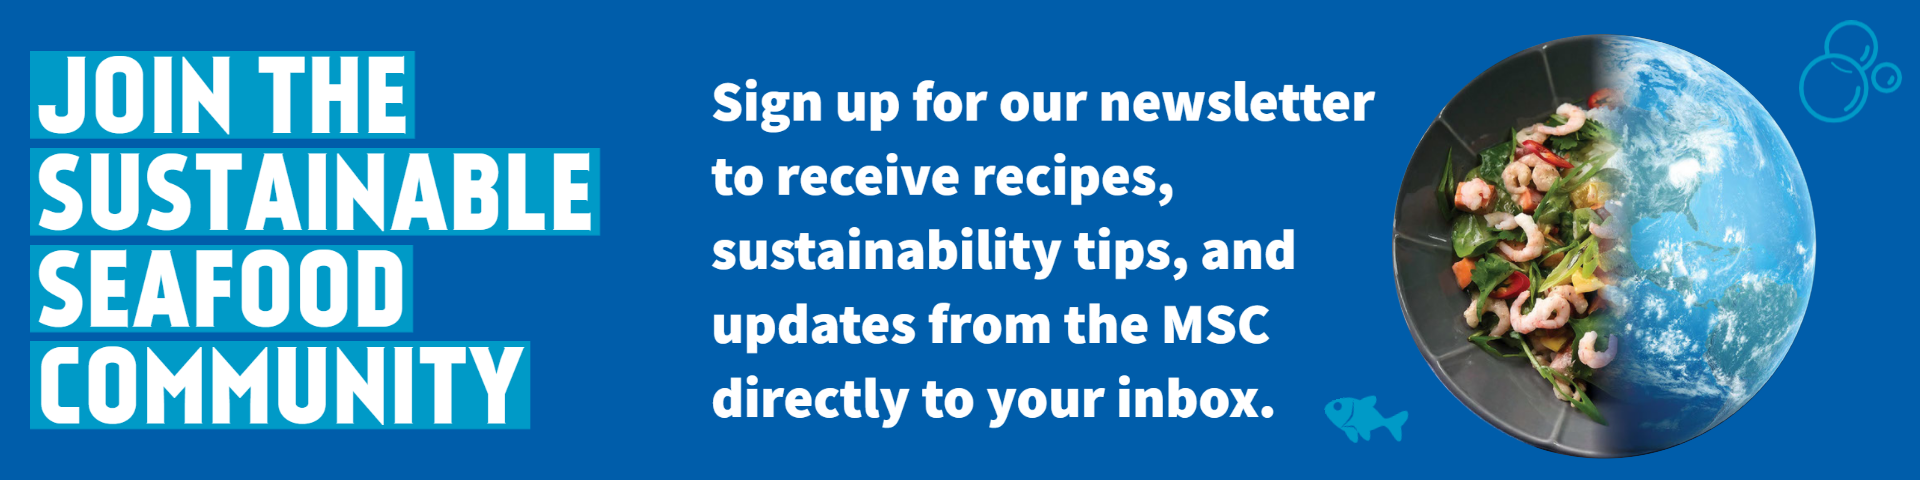 Click to sign up for our newsletter